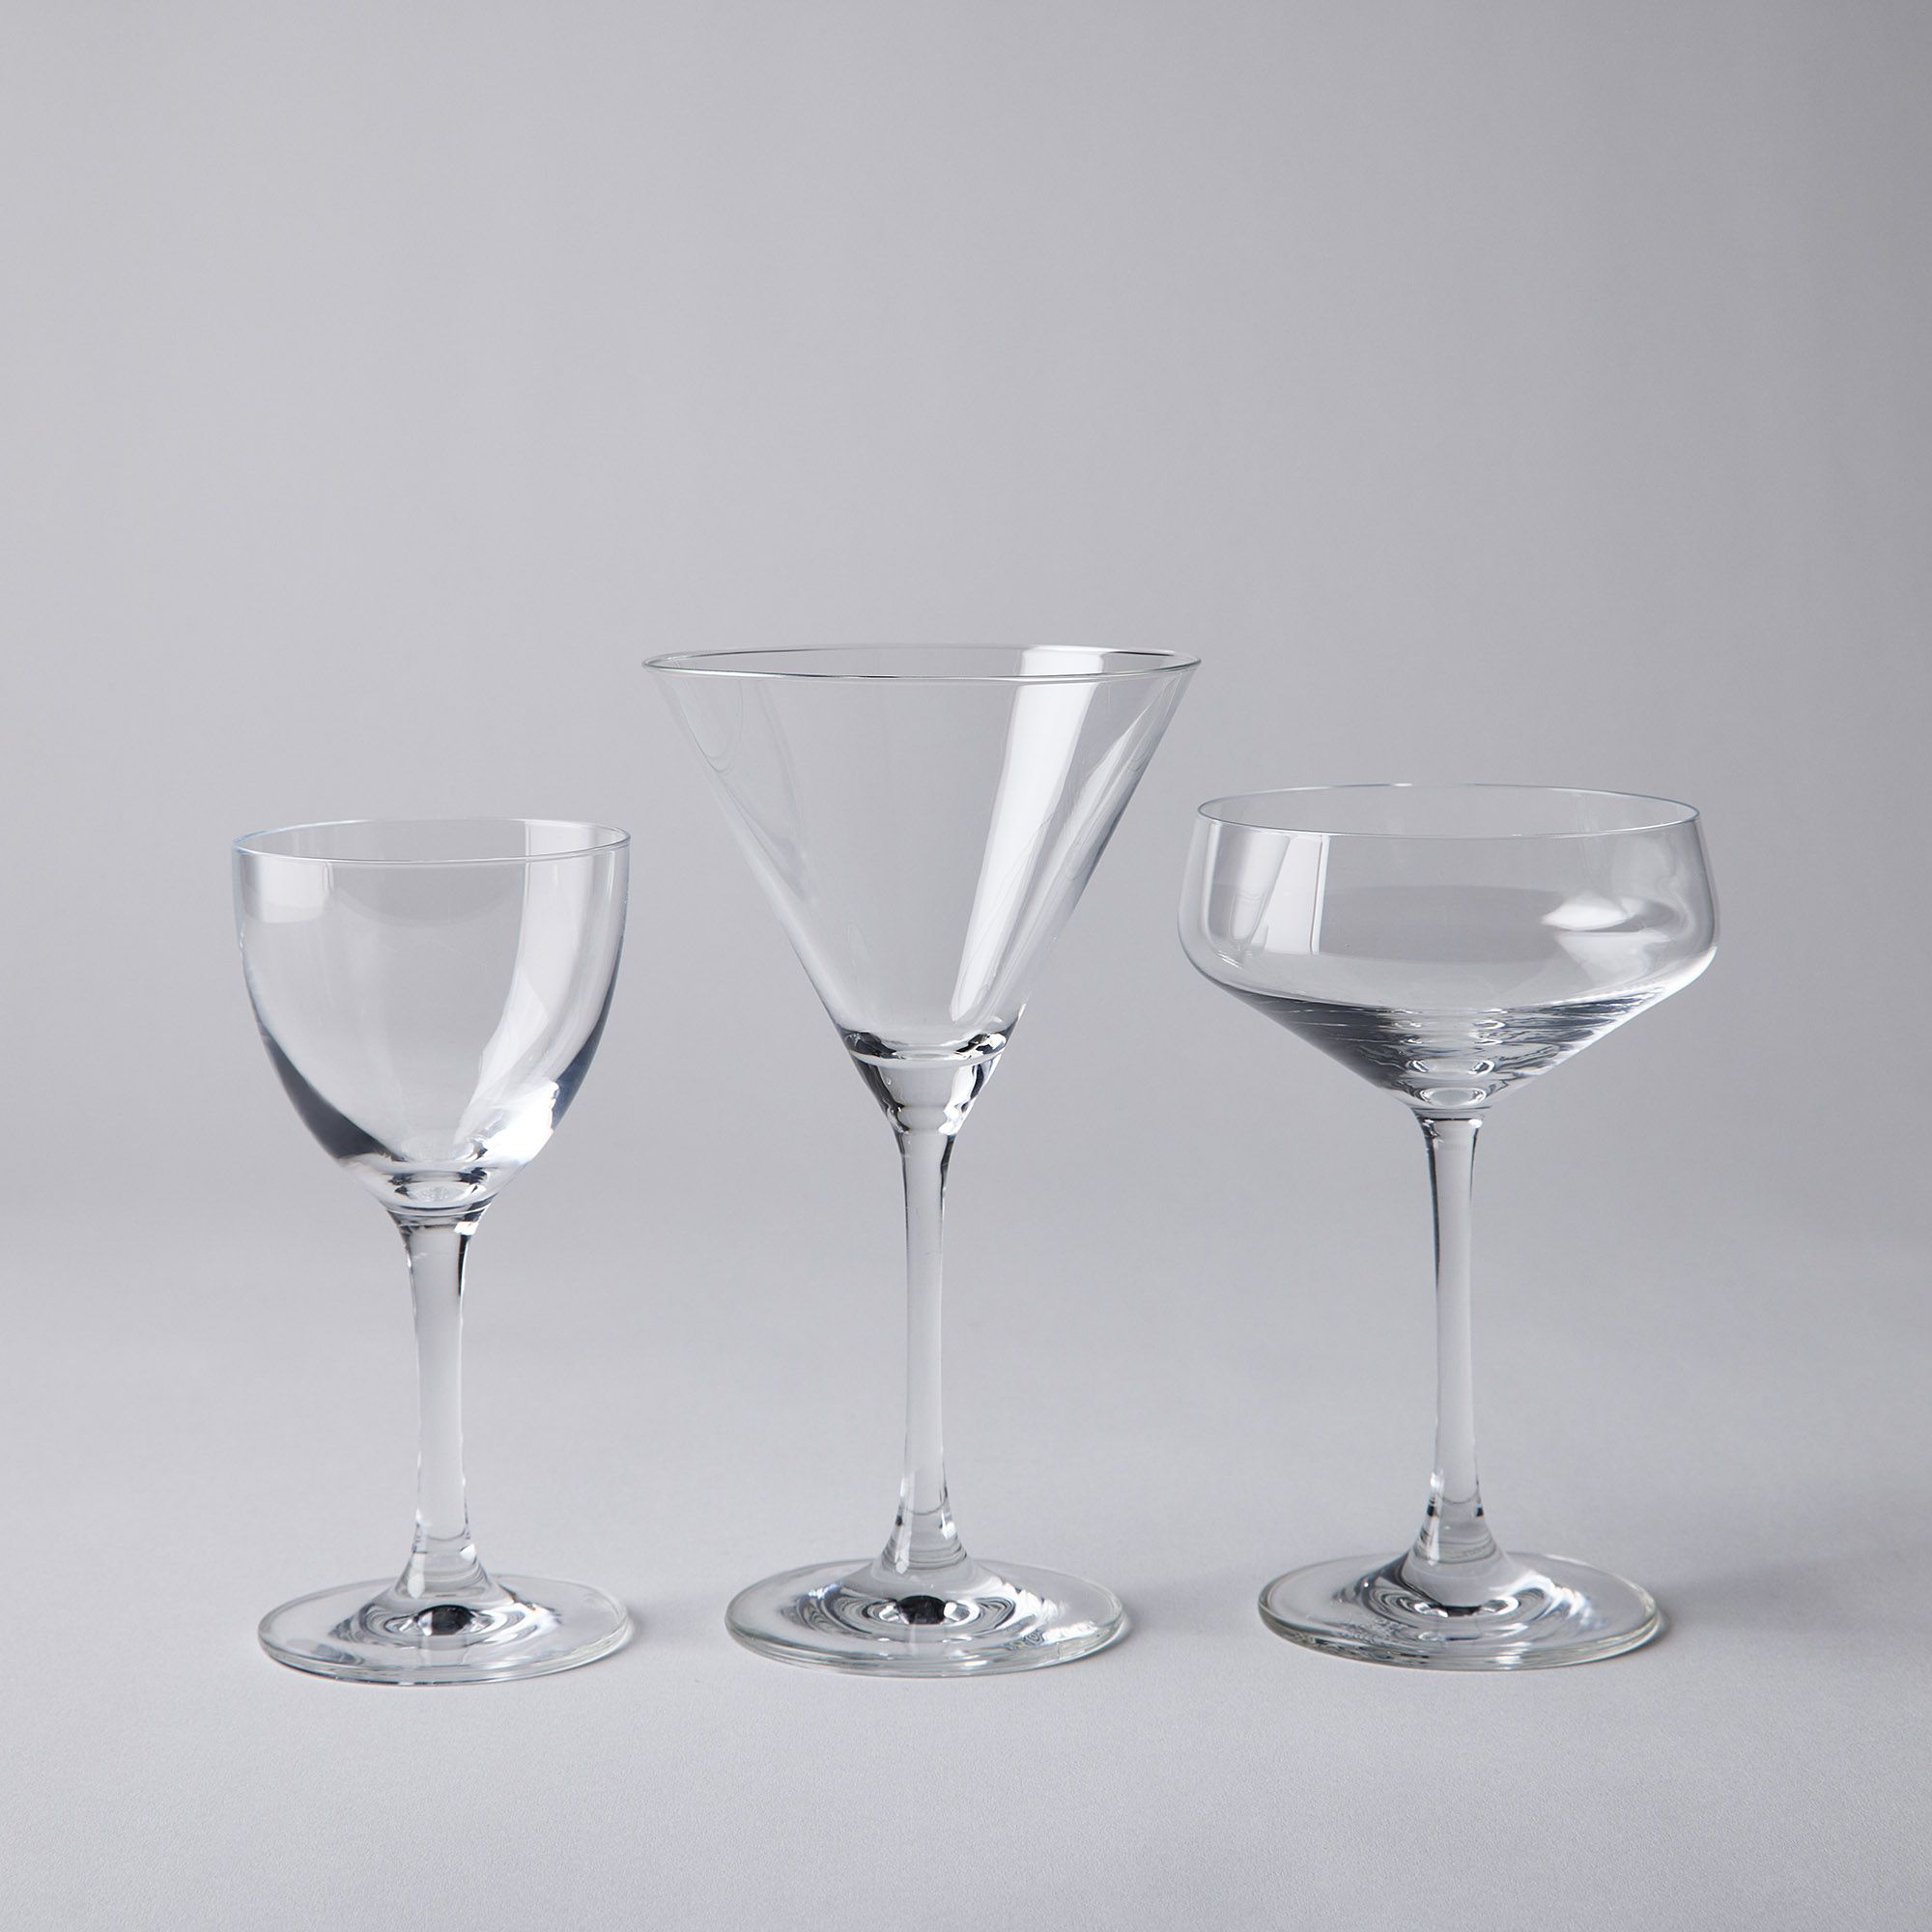 12-Piece Bar Exclusive Food52 Set, on Glasses Classic Complete Cocktail Zwiesel Schott